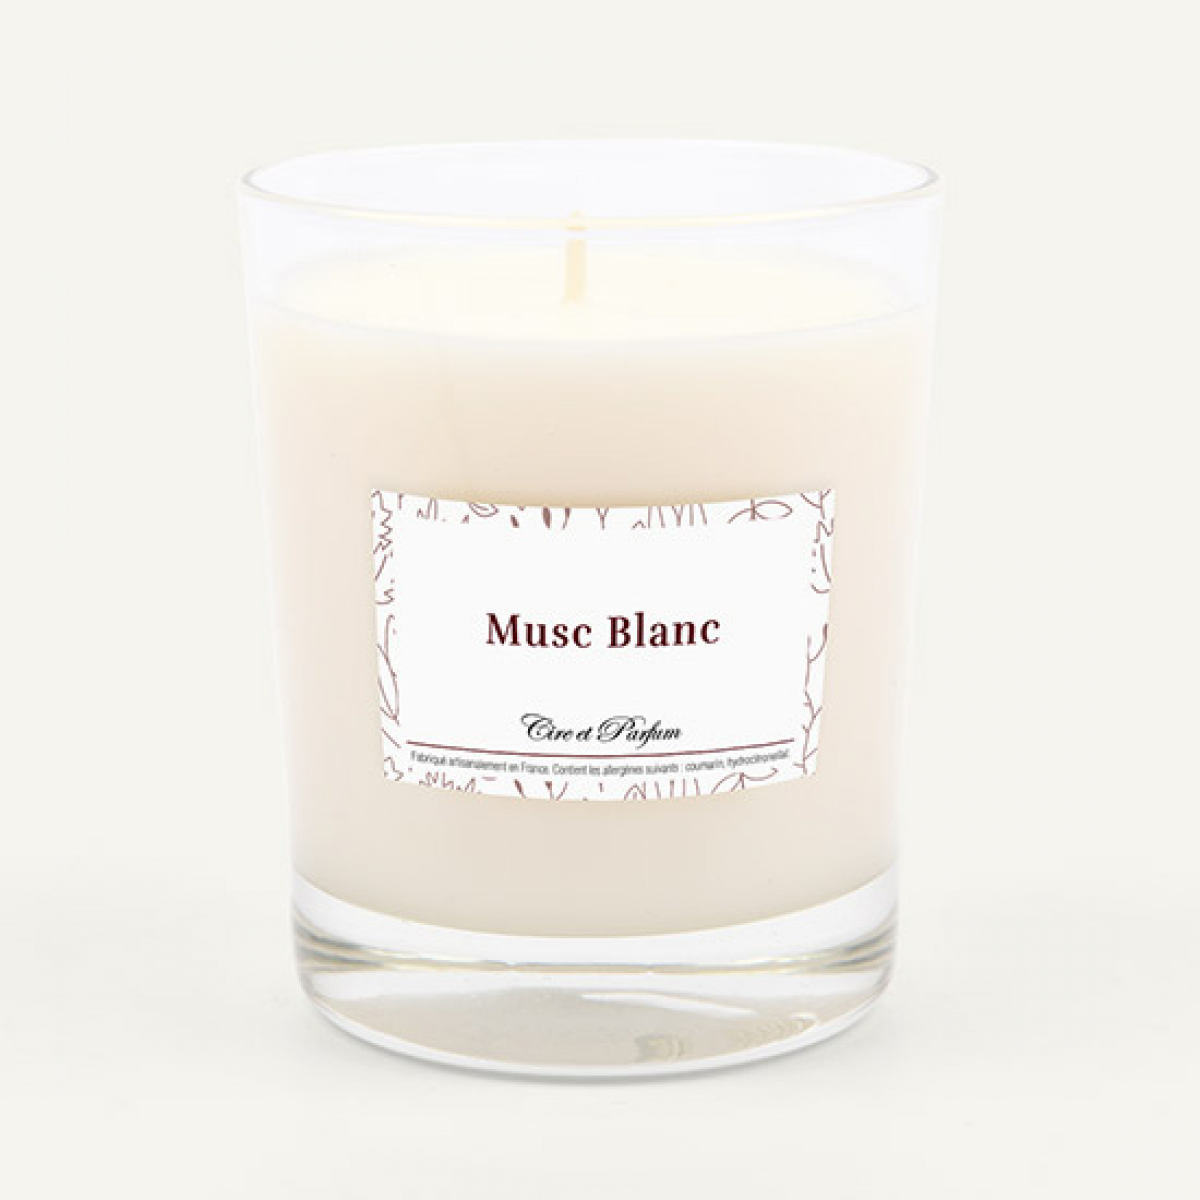 Musc blanc scented candle